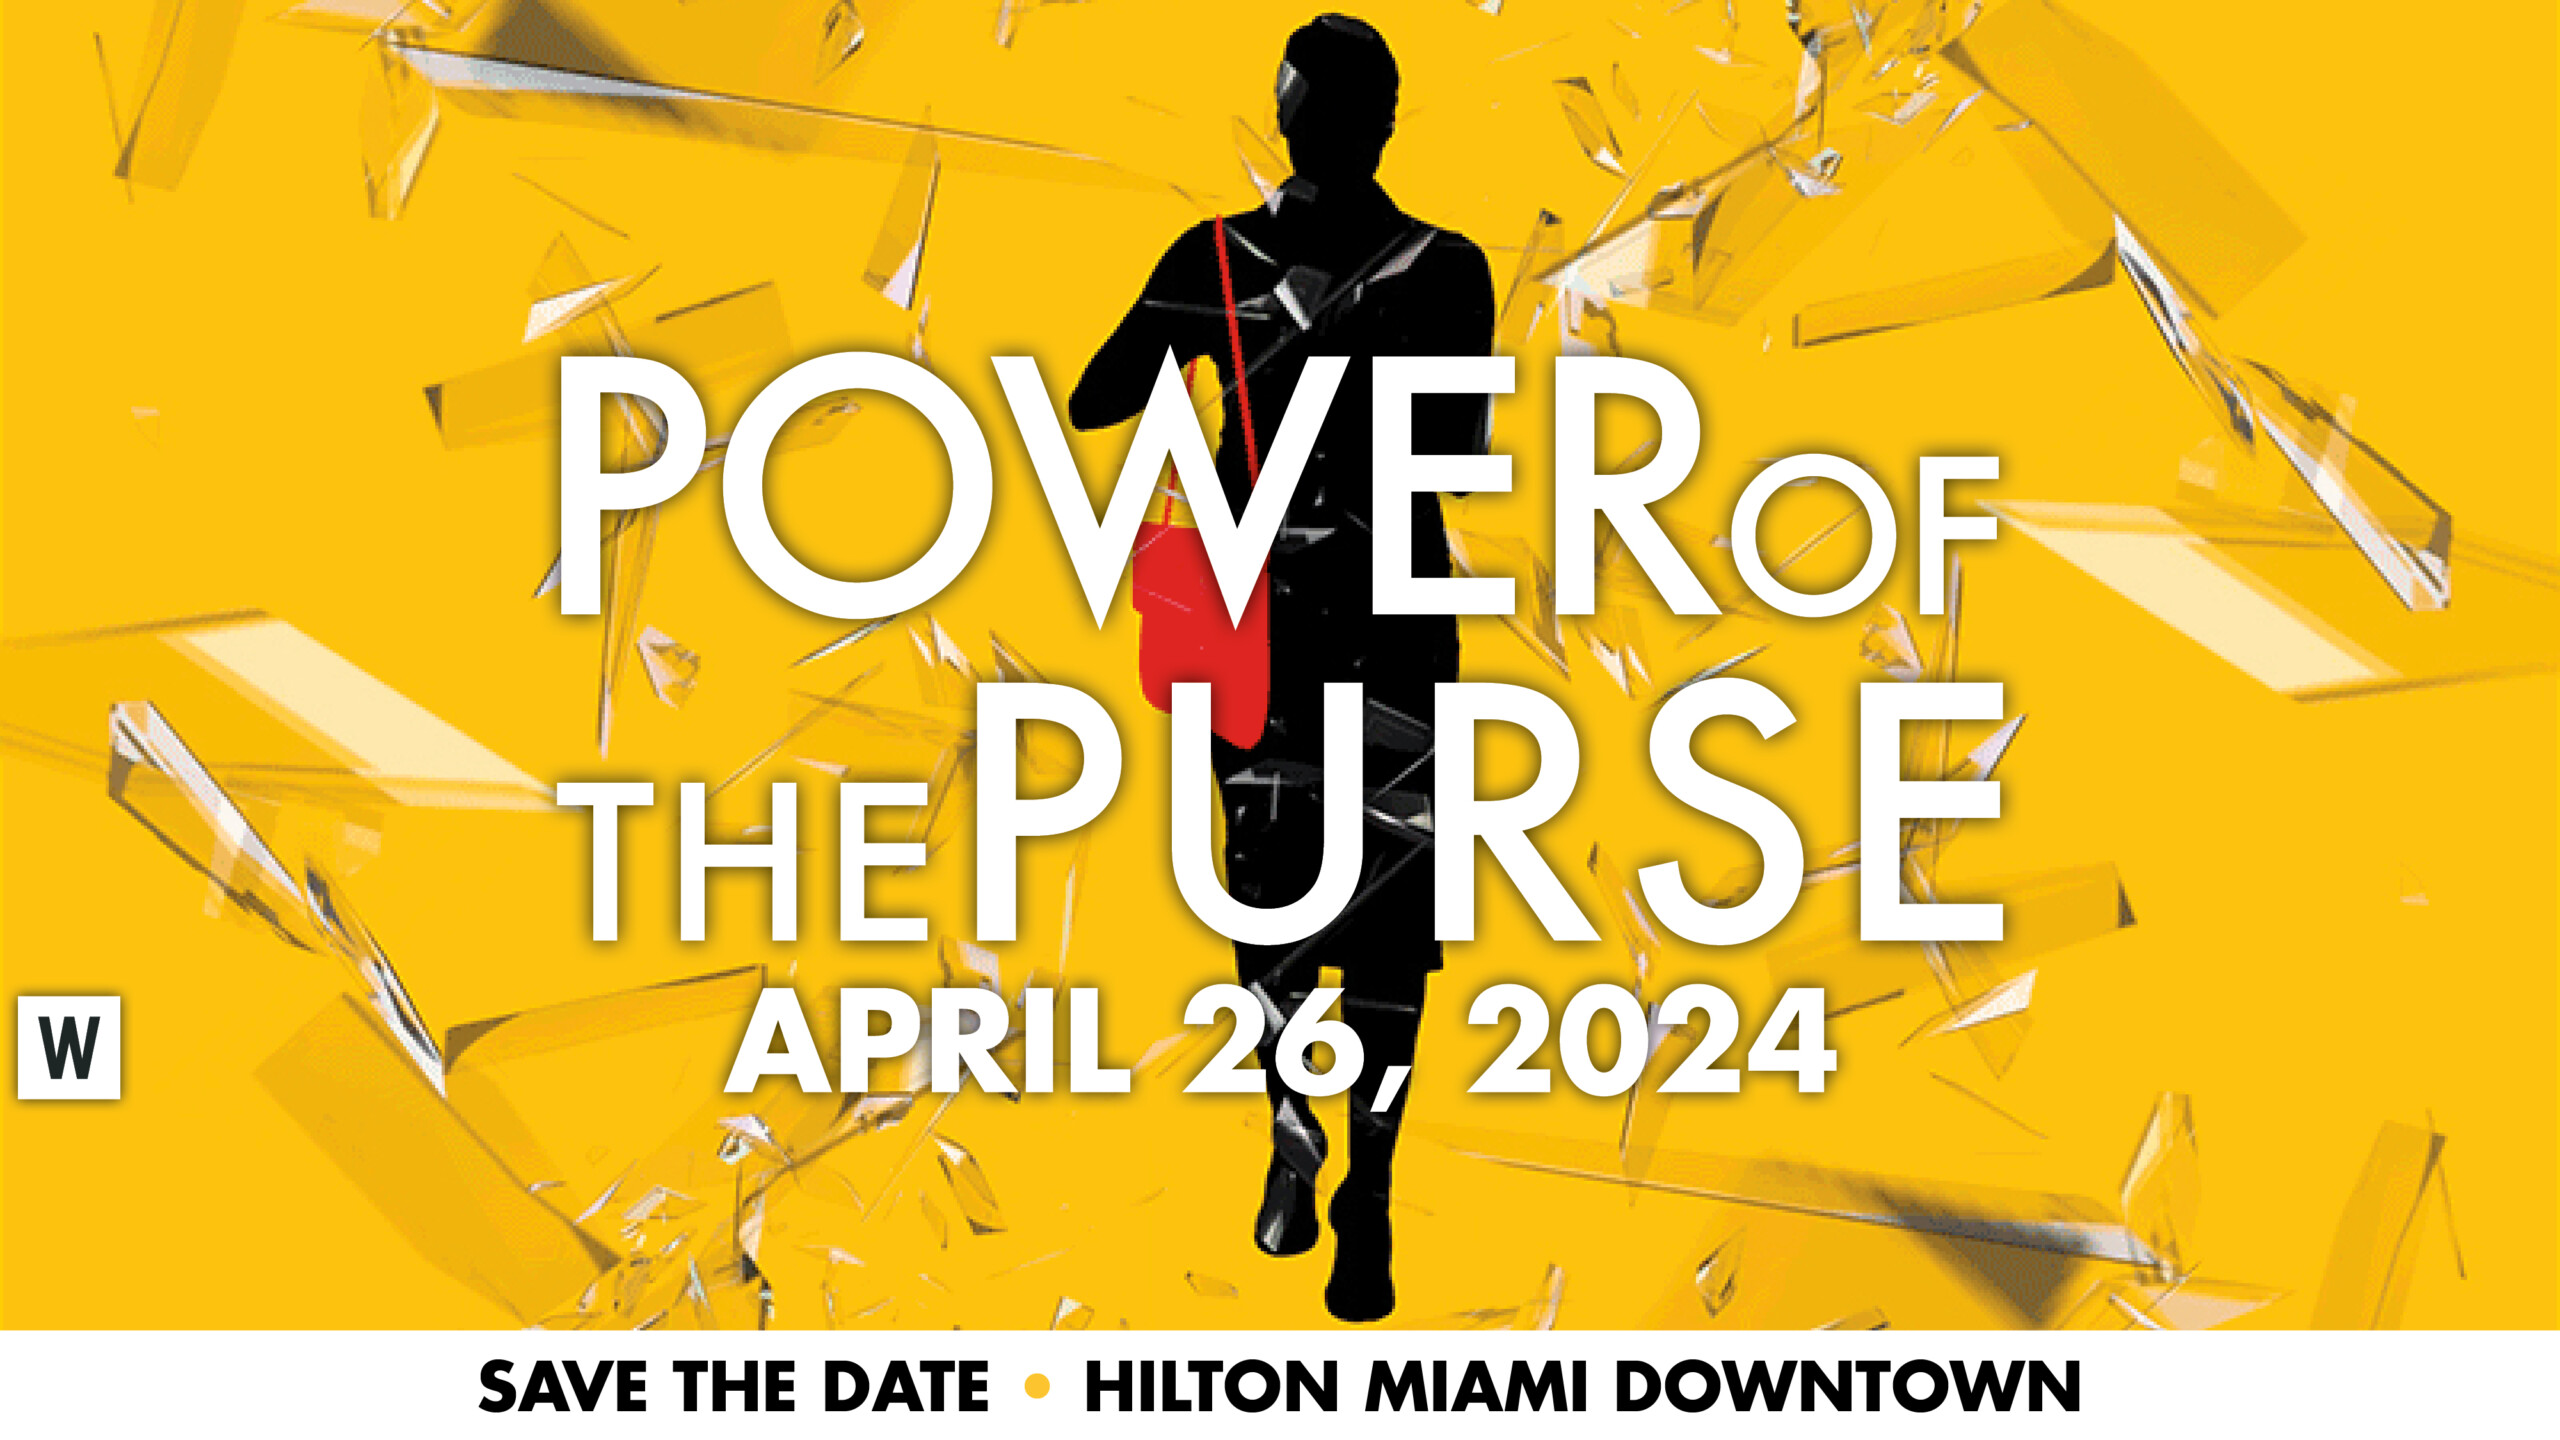 2023 Power of the Purse, a fundraiser to benefit Youth Bereavement Care -  Concordia Lutheran Ministries